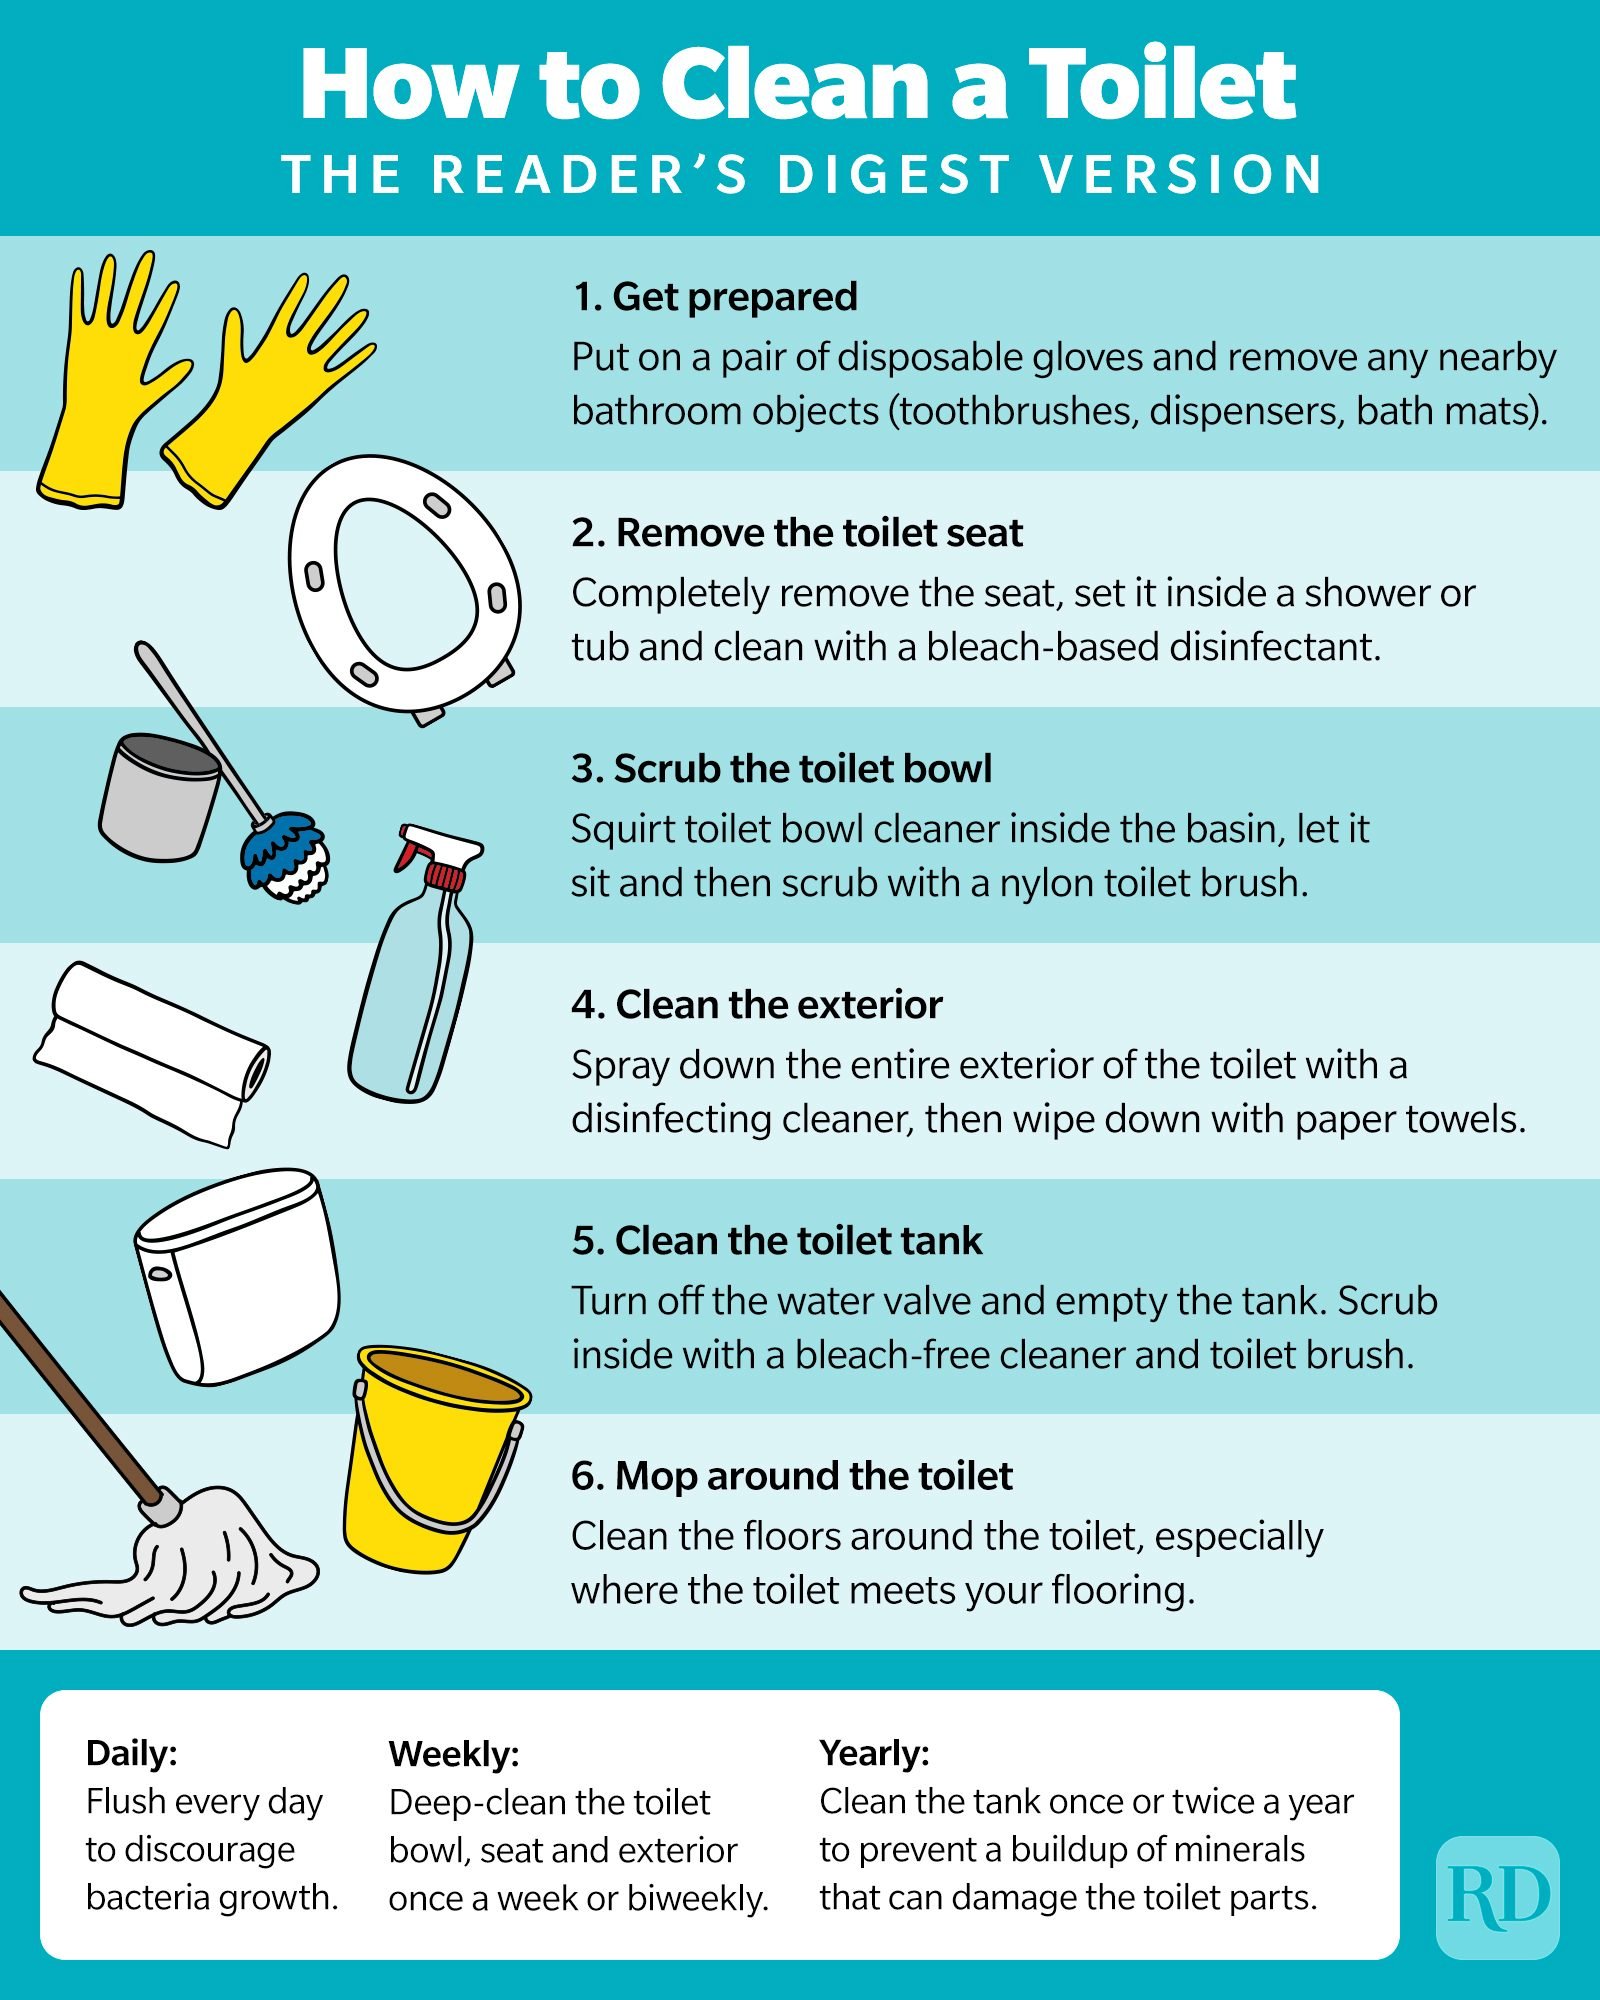 How To Clean A Toilet Infographic